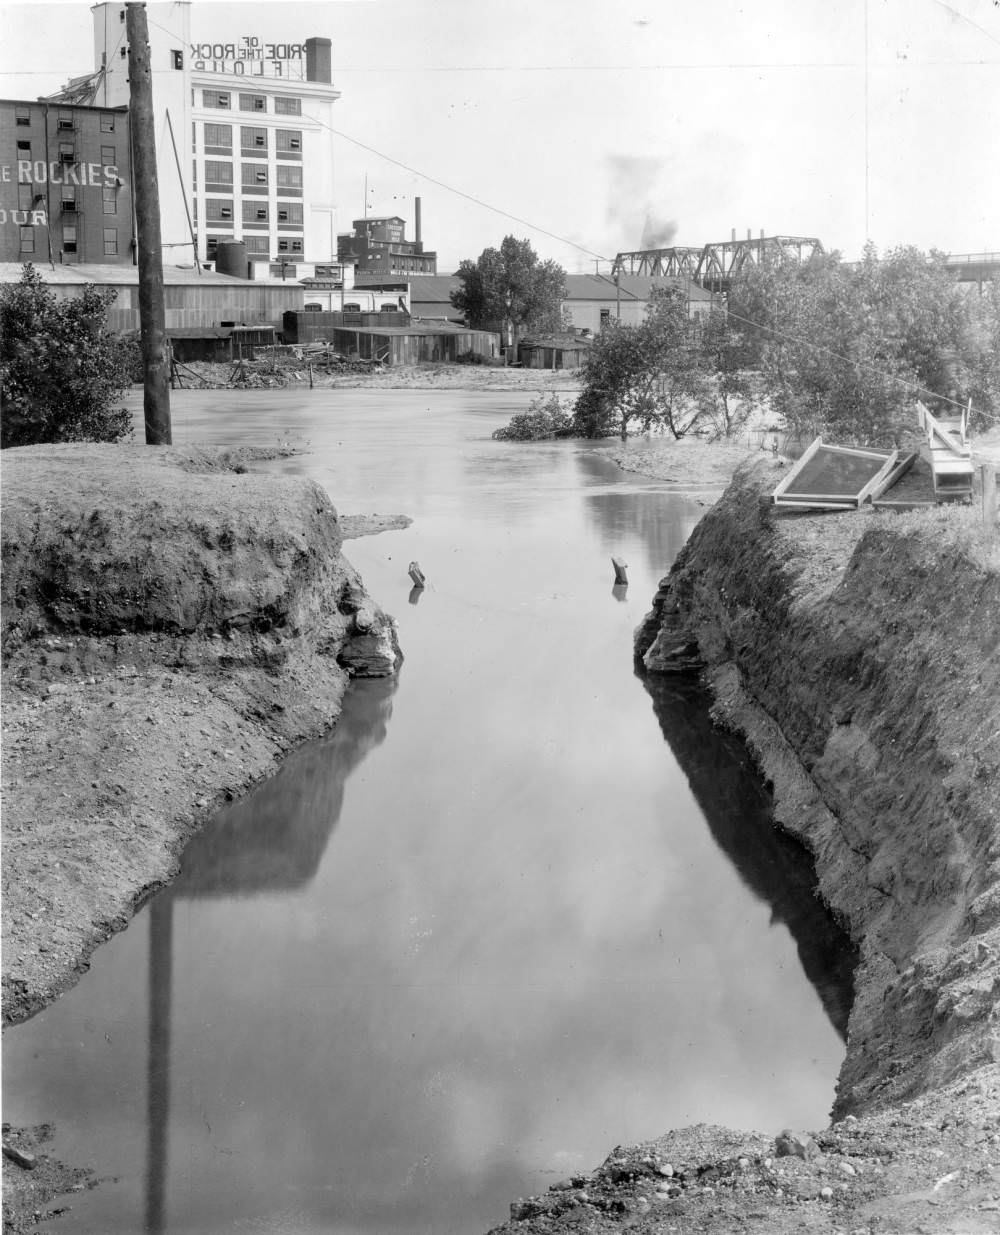 Construction site near South Platte River, featuring Pride of the Rockies Flour Mill and 20th Street Viaduct, 1900s